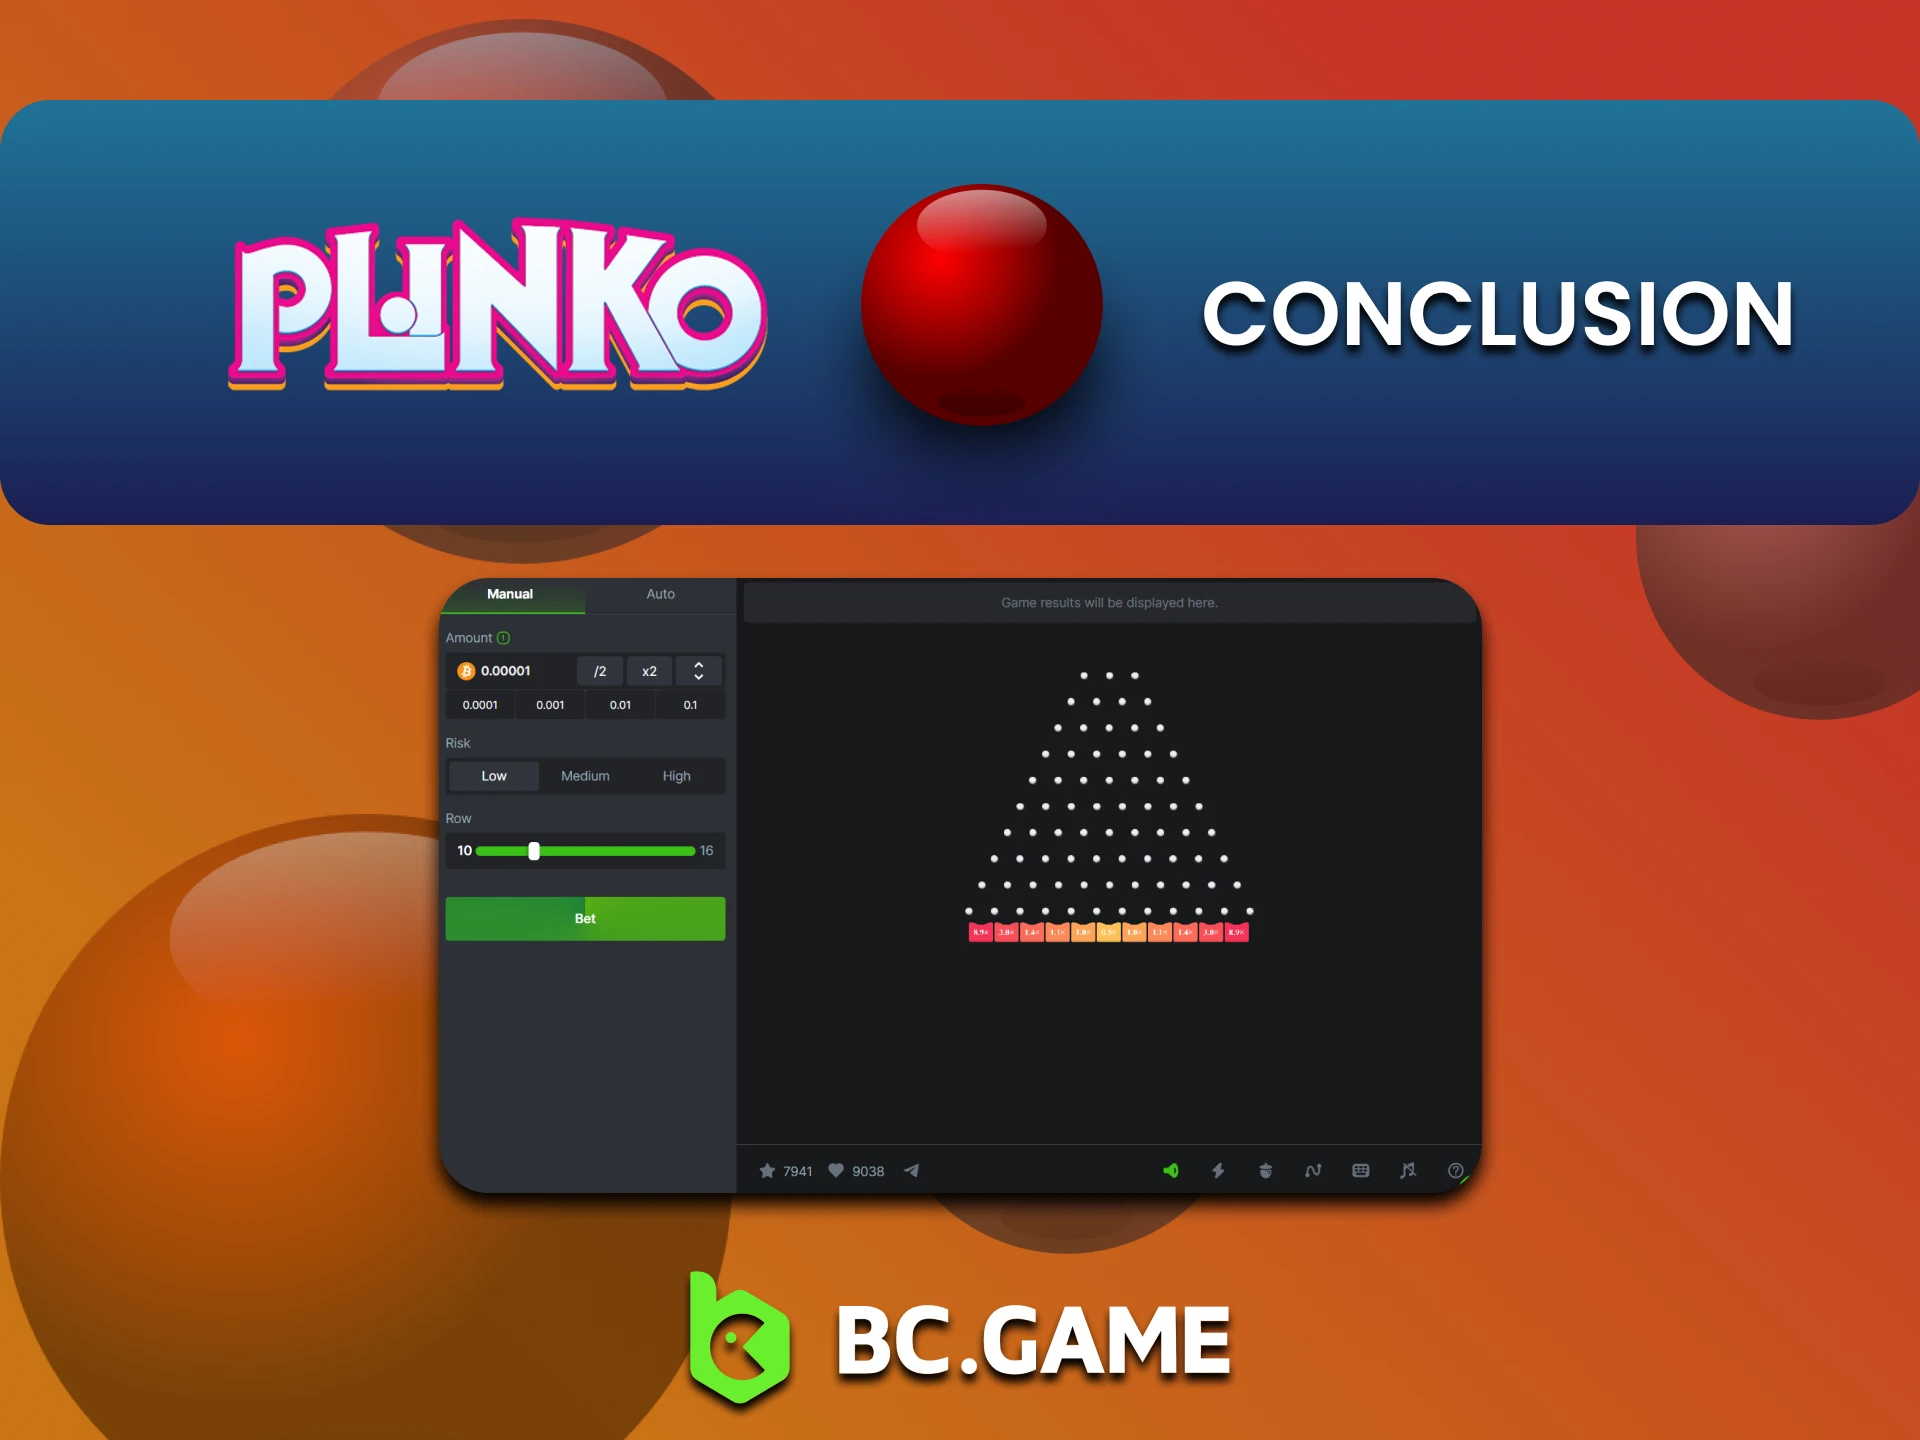 BCGame is one of the best options for playing Plinko.